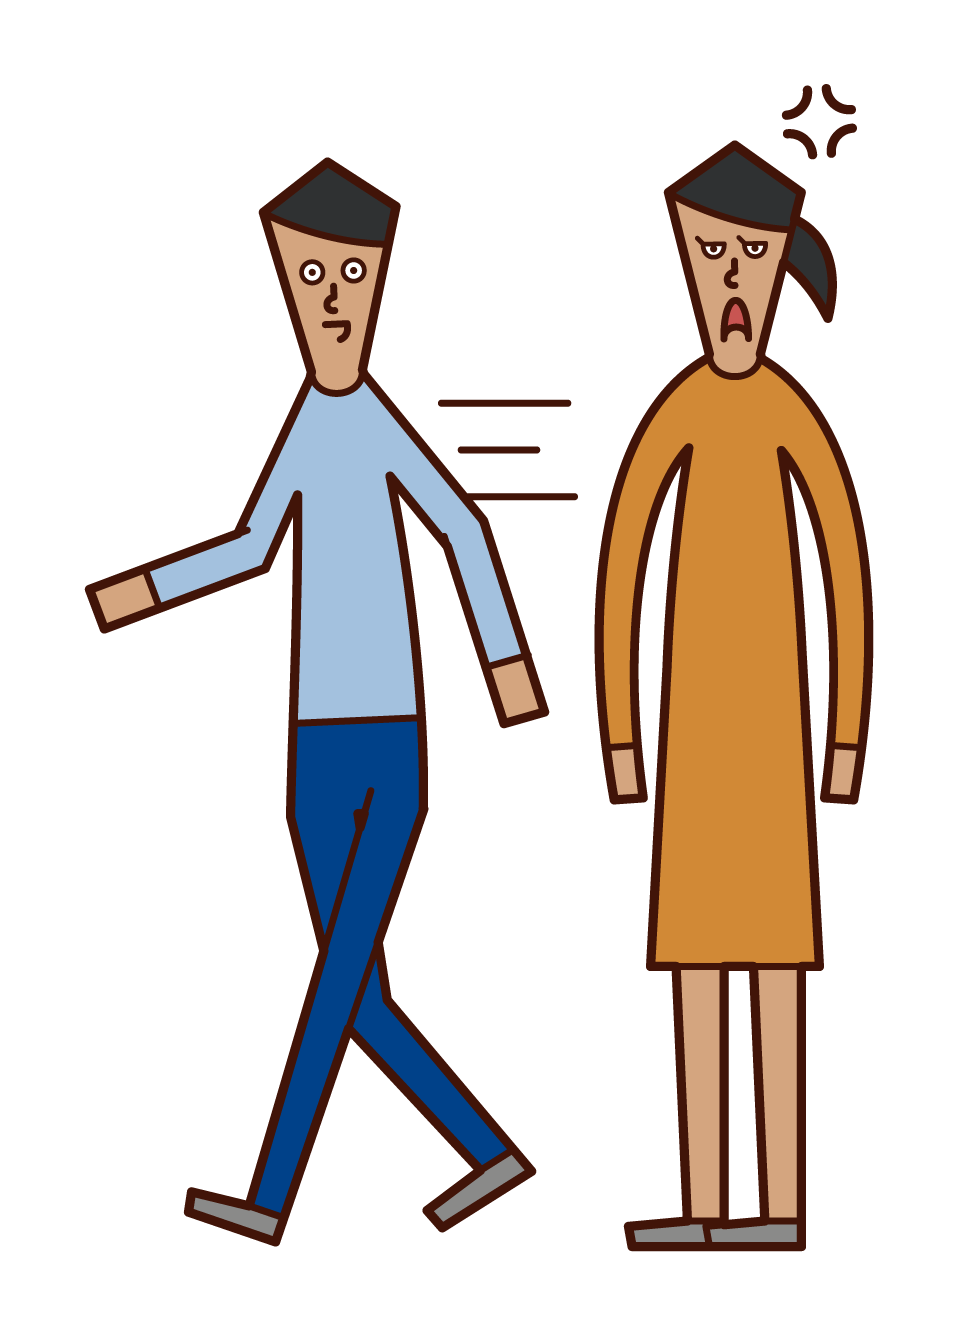 Illustration of a man walking fast while dating